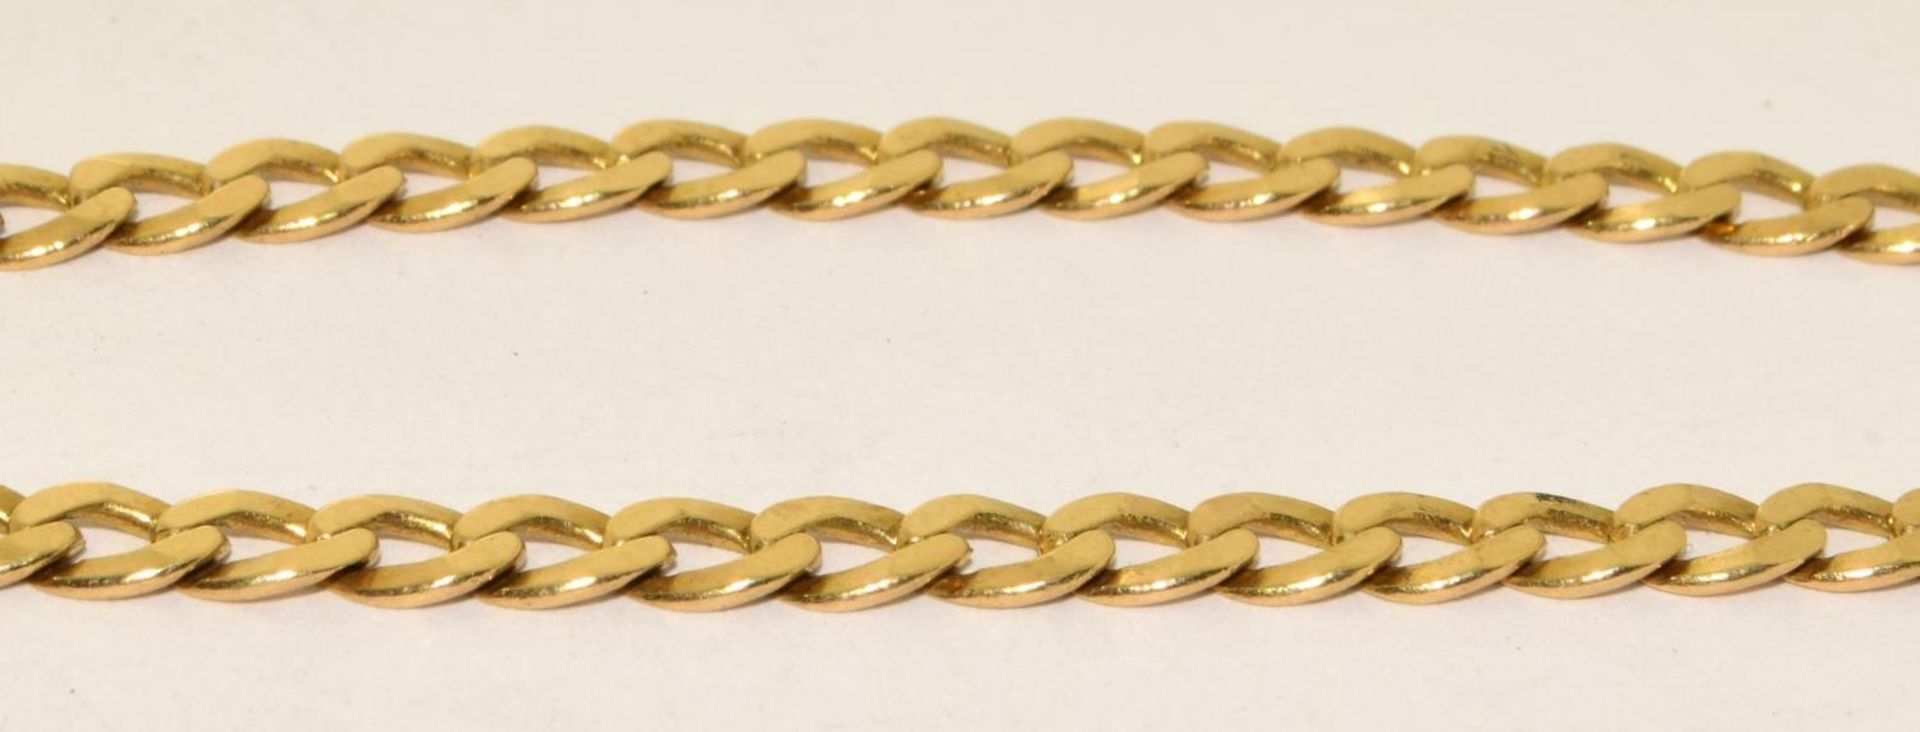 9ct gold flat link neck chain 10.6g with lobster claw clasp ref 72 - Image 3 of 4